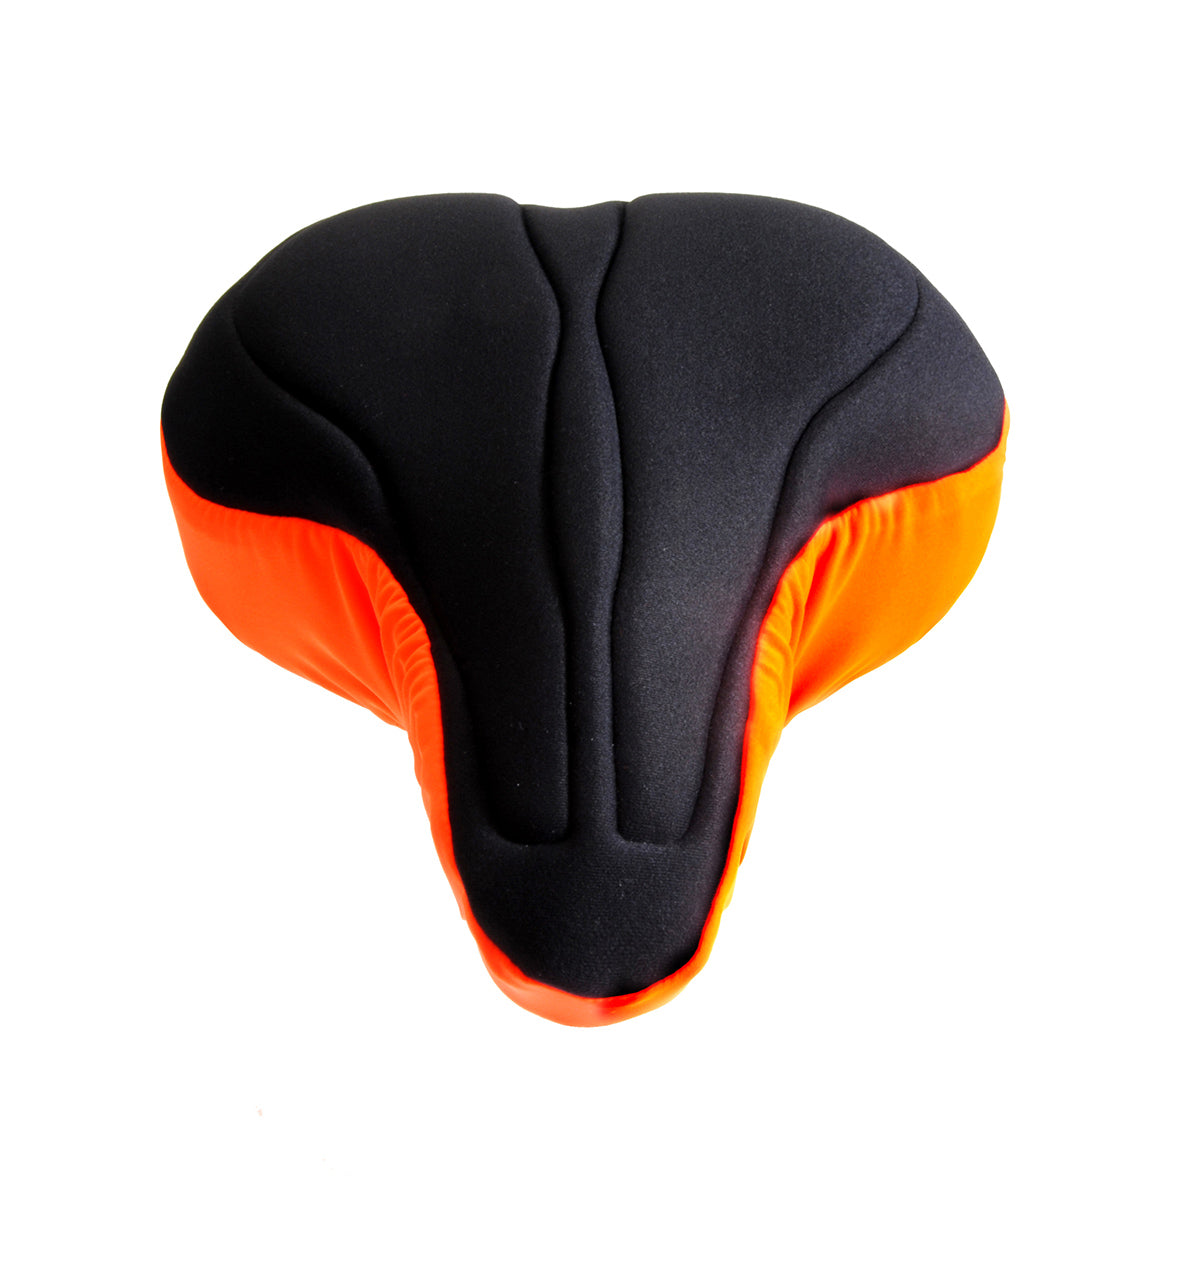 http://www.pedalshed.com/cdn/shop/products/SPIN_Class_Exercise_Bike_Wide_Bike_Seat_Cover_Black_Orange_Cardiostrong_BodyMax_Taurus_Ergo-X_LifeFitness_Club_series_Training_comfort_Pedalshed_sm.jpg?v=1620913874&width=2048